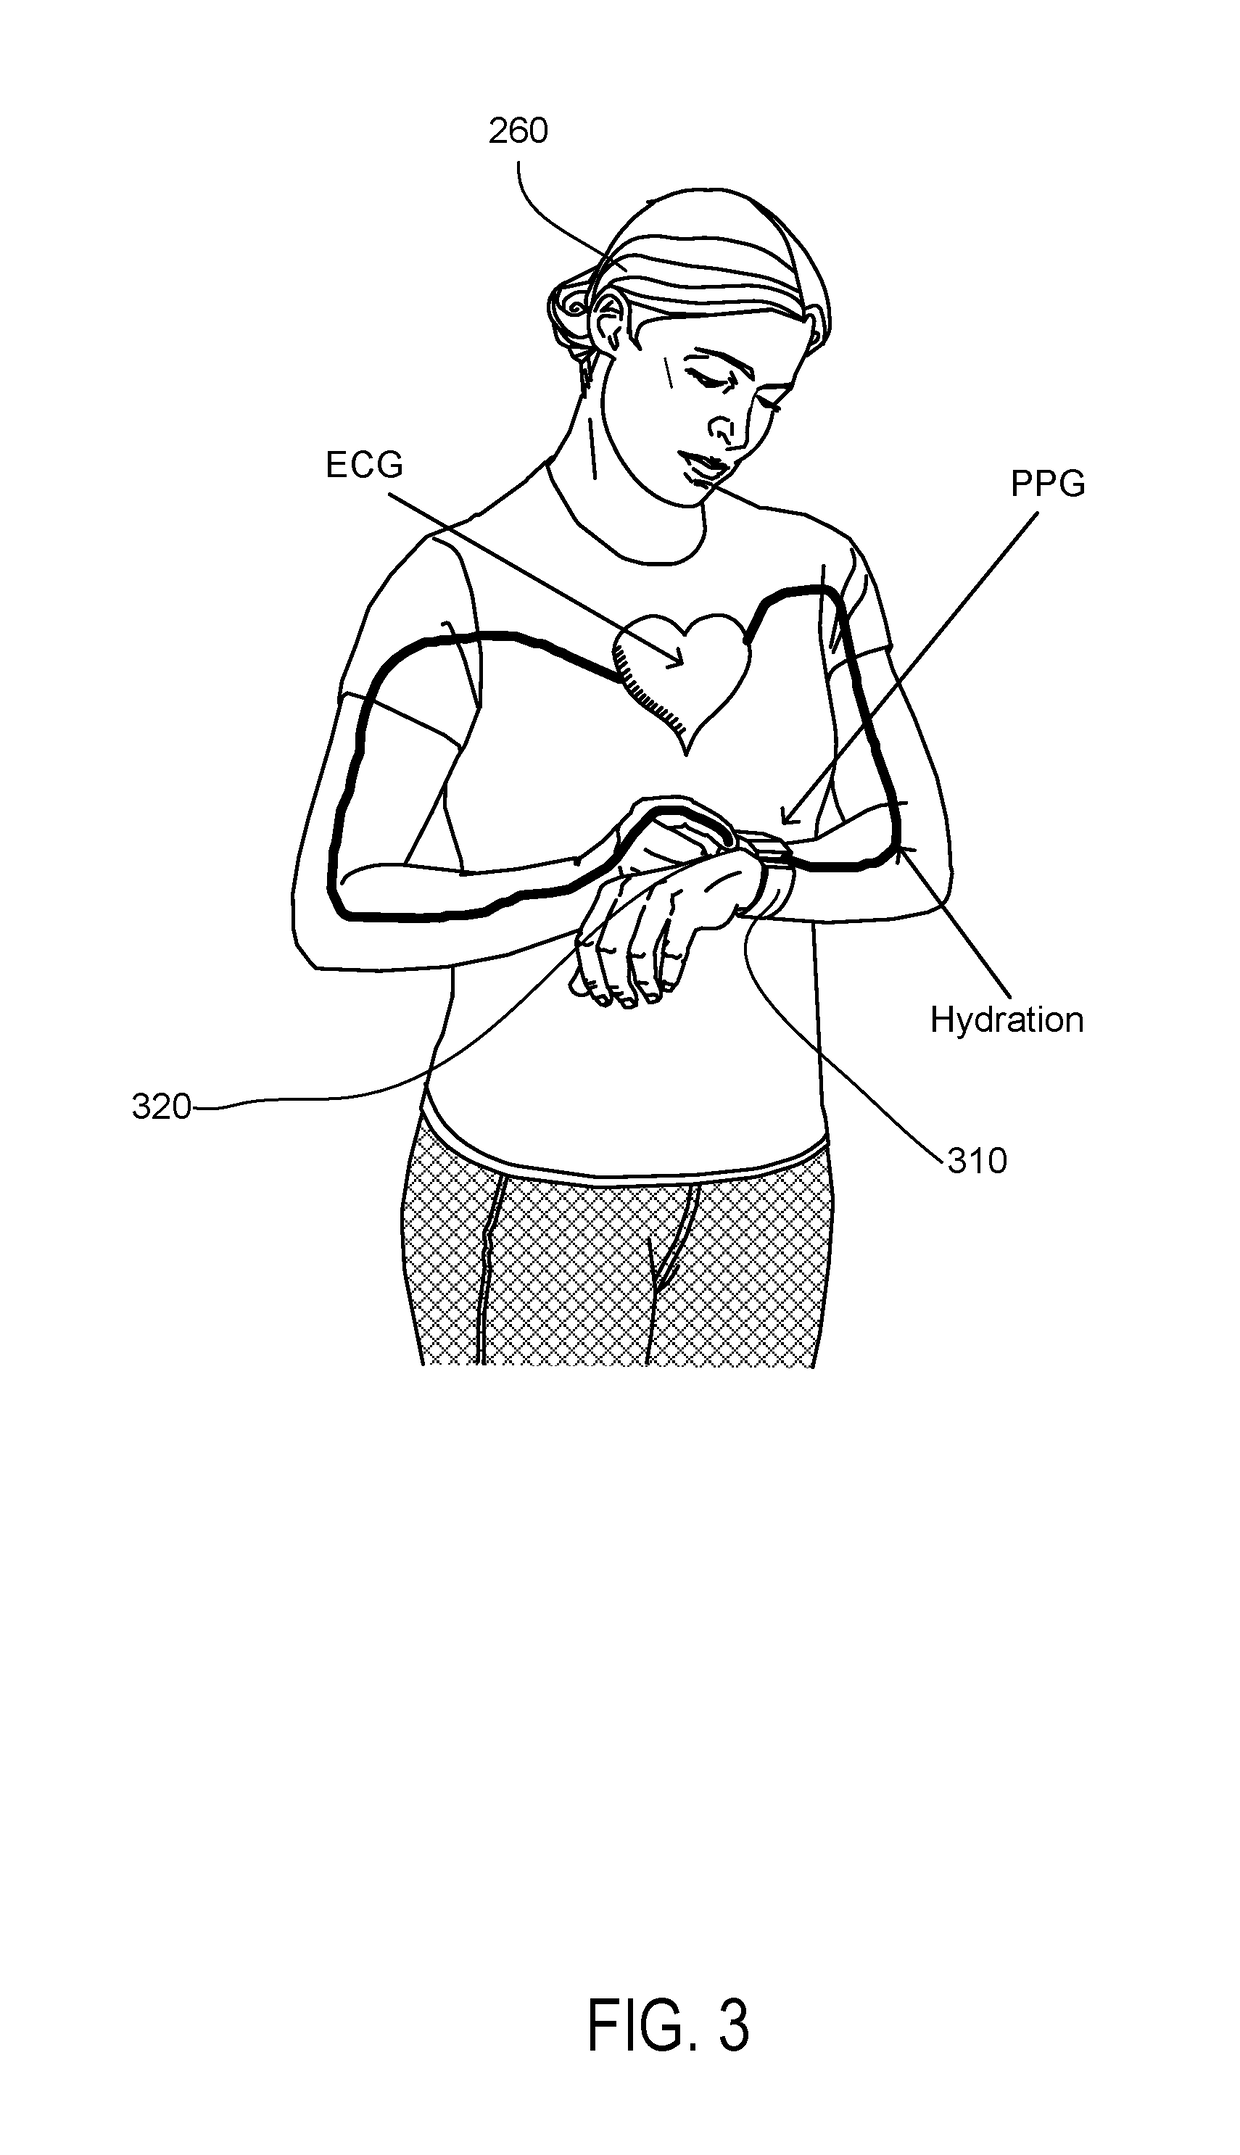 System and method for obtaining bodily function measurements using a mobile device